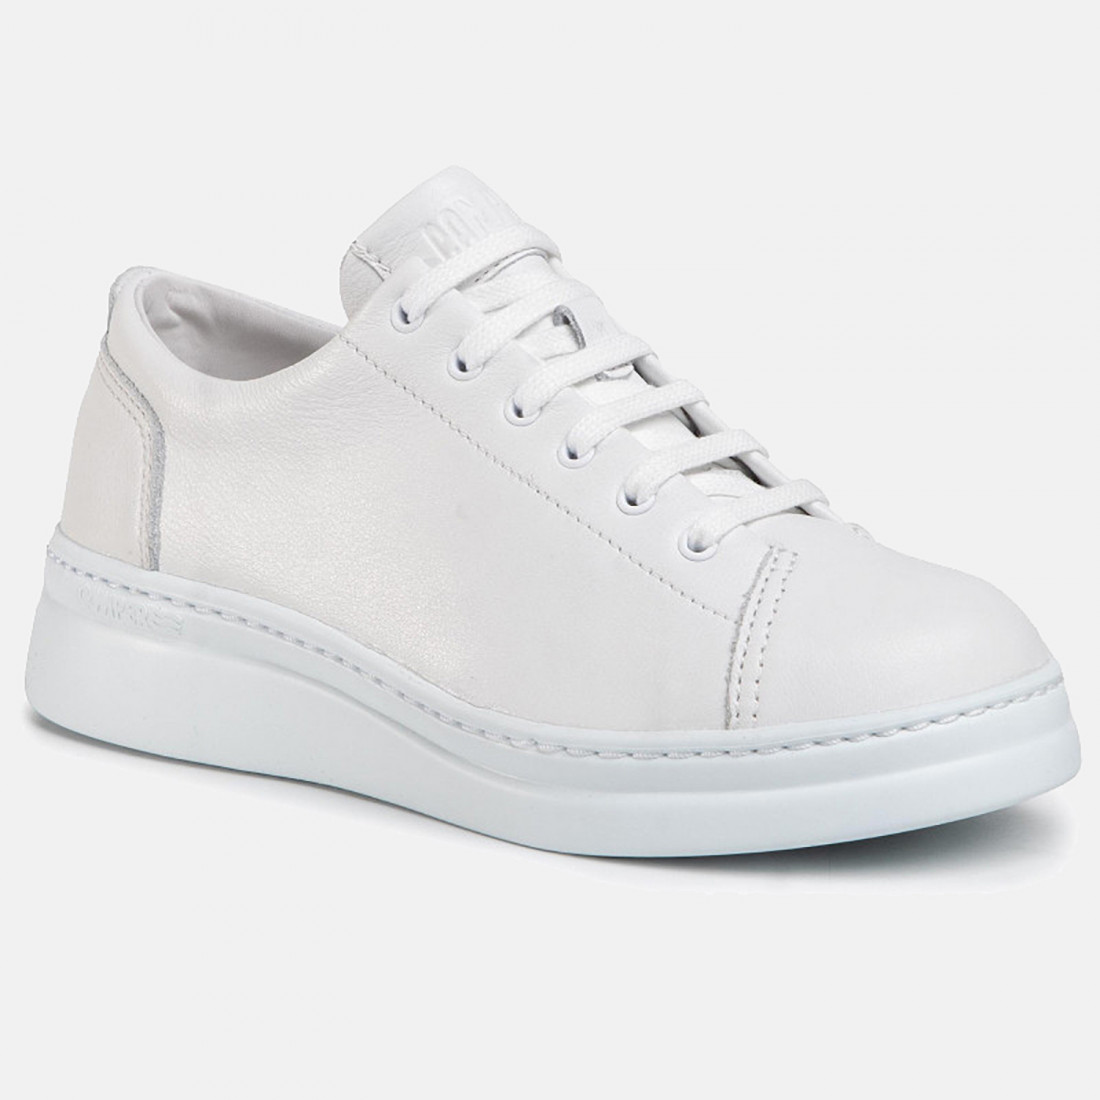 Camper Runner Up sneakers for women in White leather